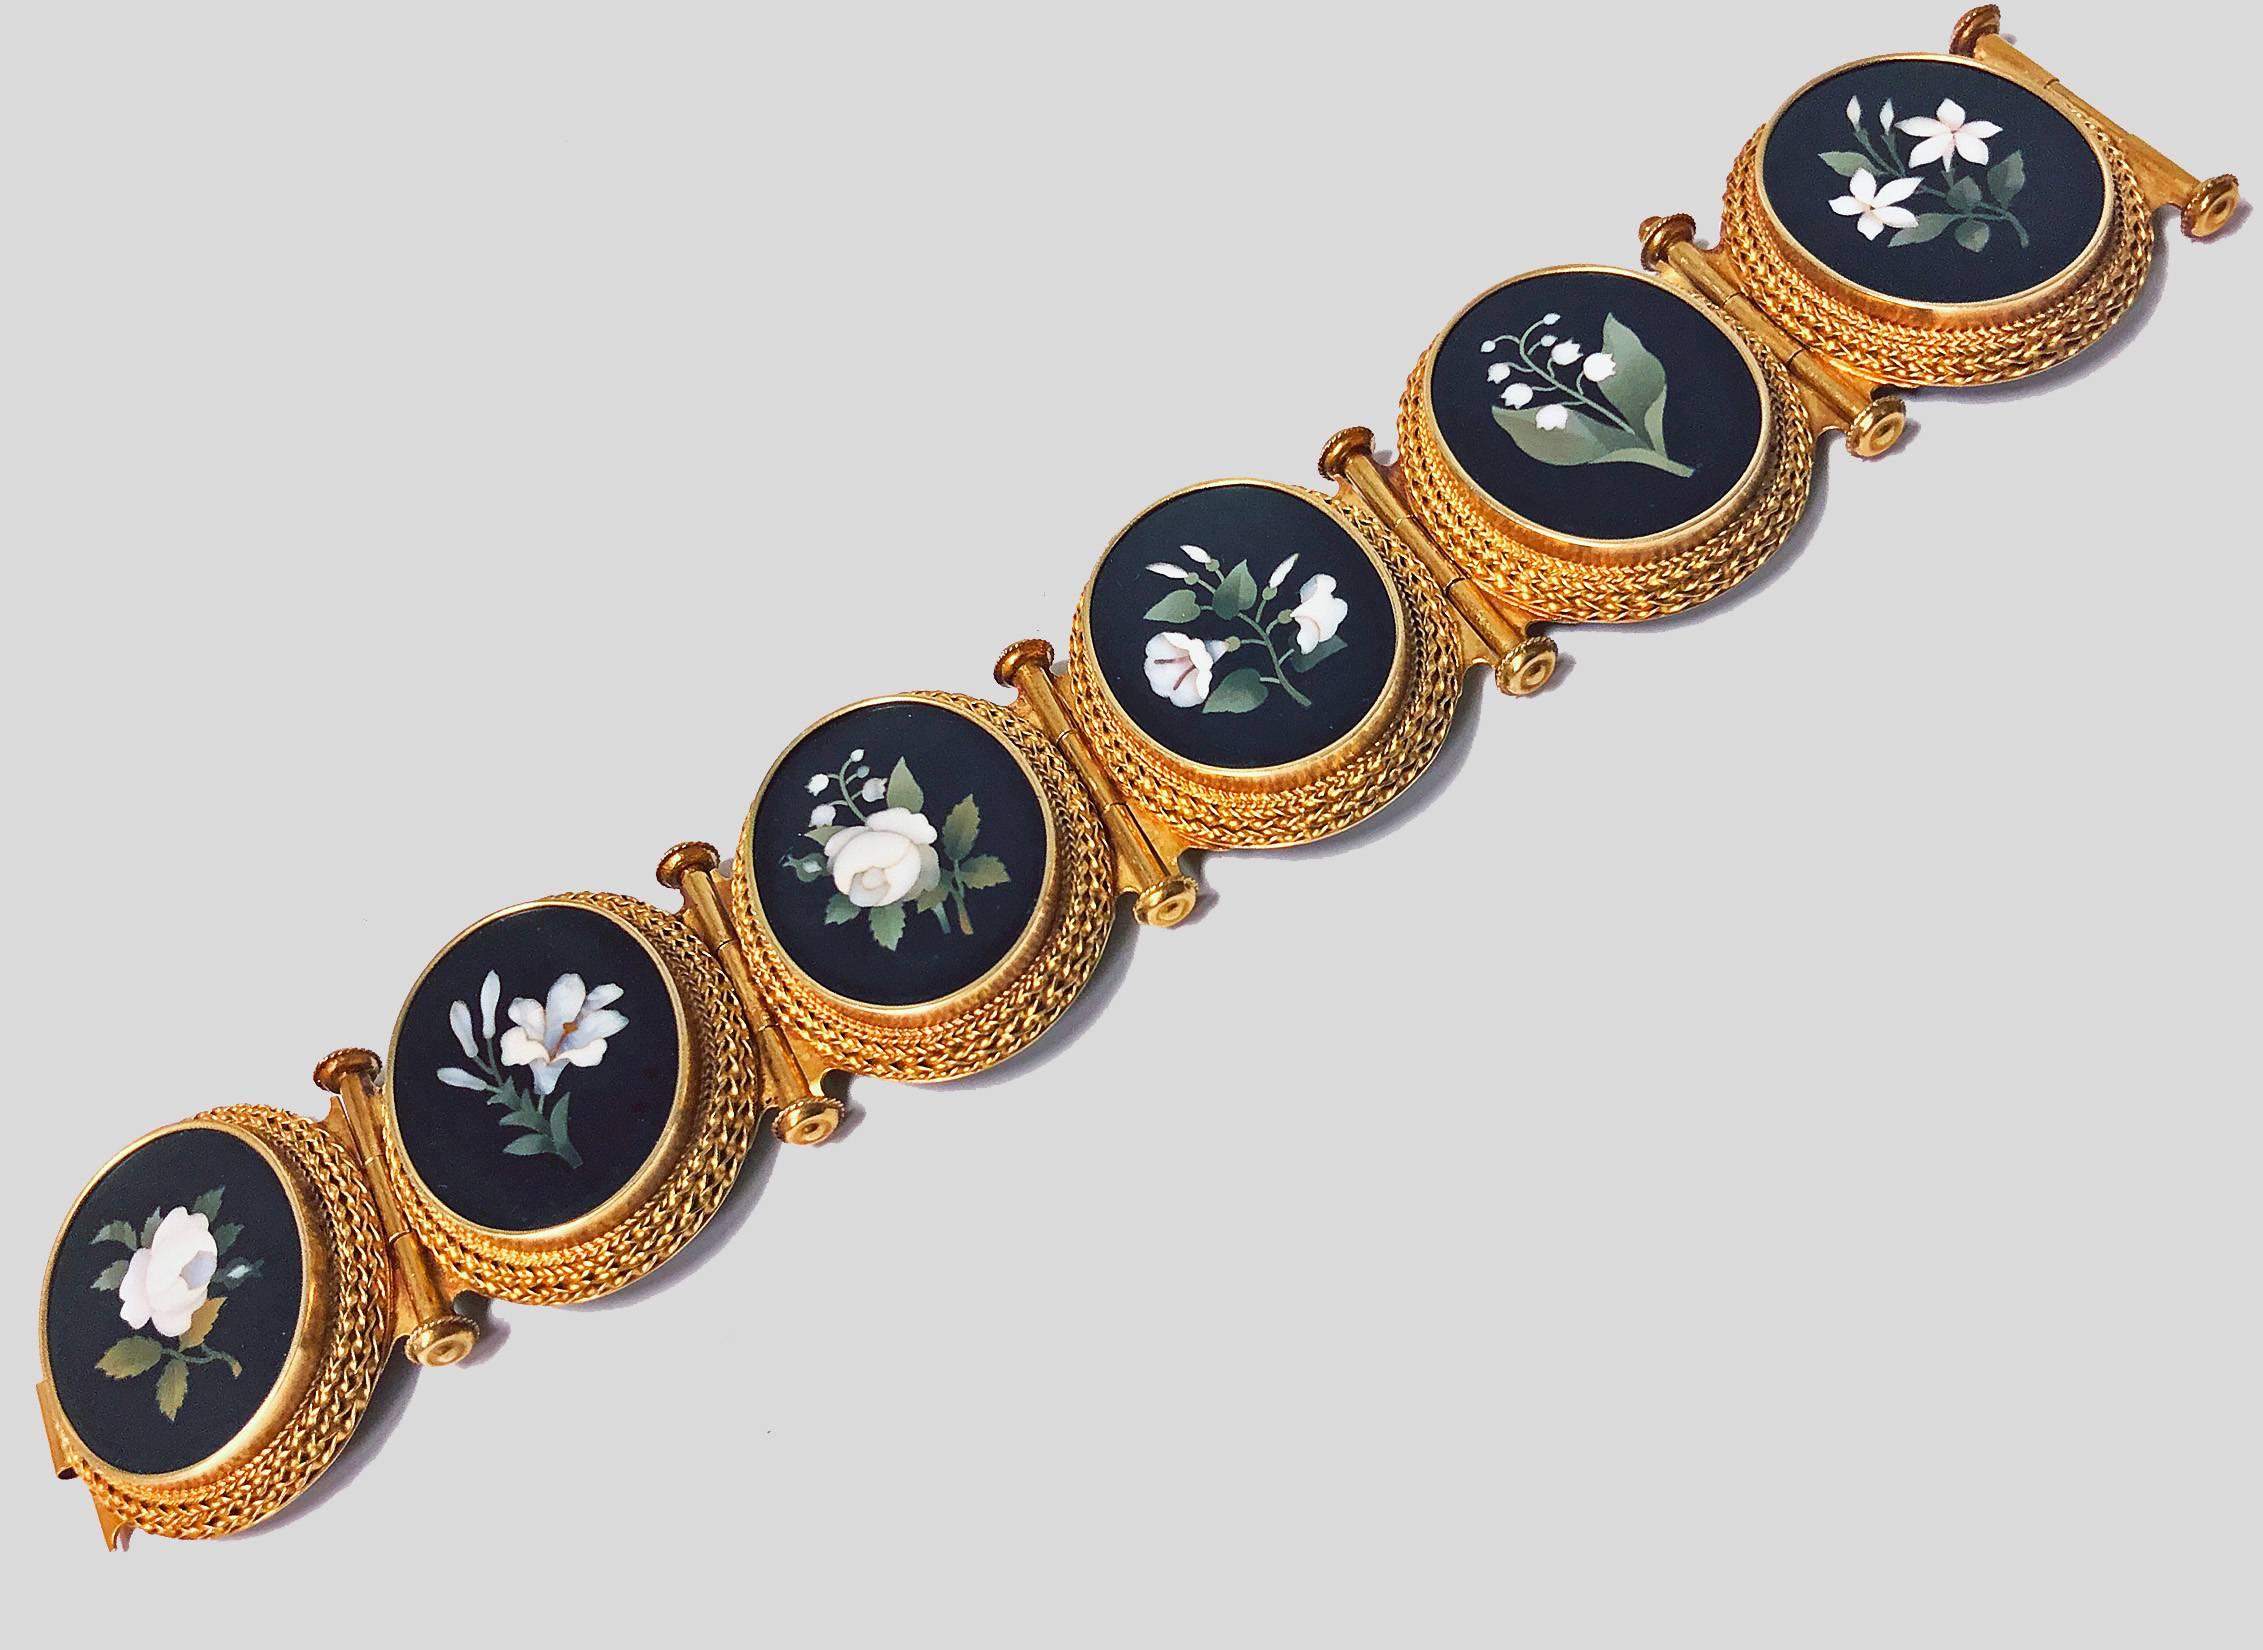 Very fine 19th century 18-karat (tested) gold Pietra Dura bracelet, Italy, circa1875. The bracelet with six oval etruscan granular gold set Pietra Dura depicting foliage, detachable hinged gold links between, terminating with link conforming as